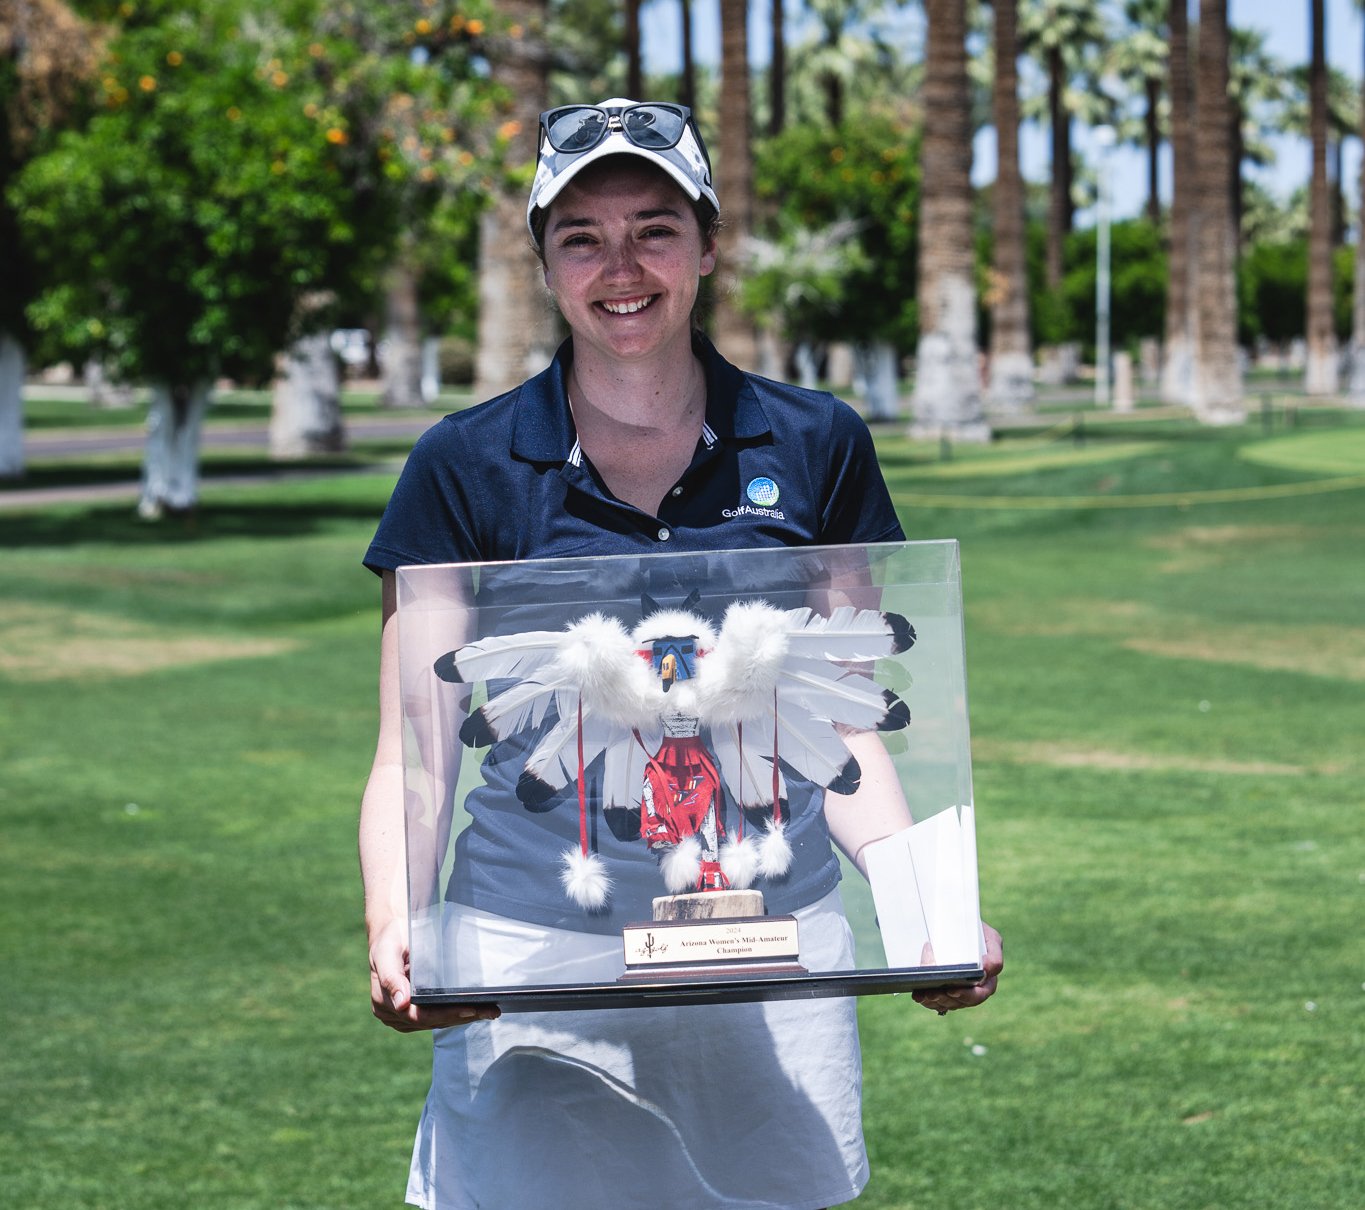 Hodgkins goes back-to-back at AGA Women's Mid-Am